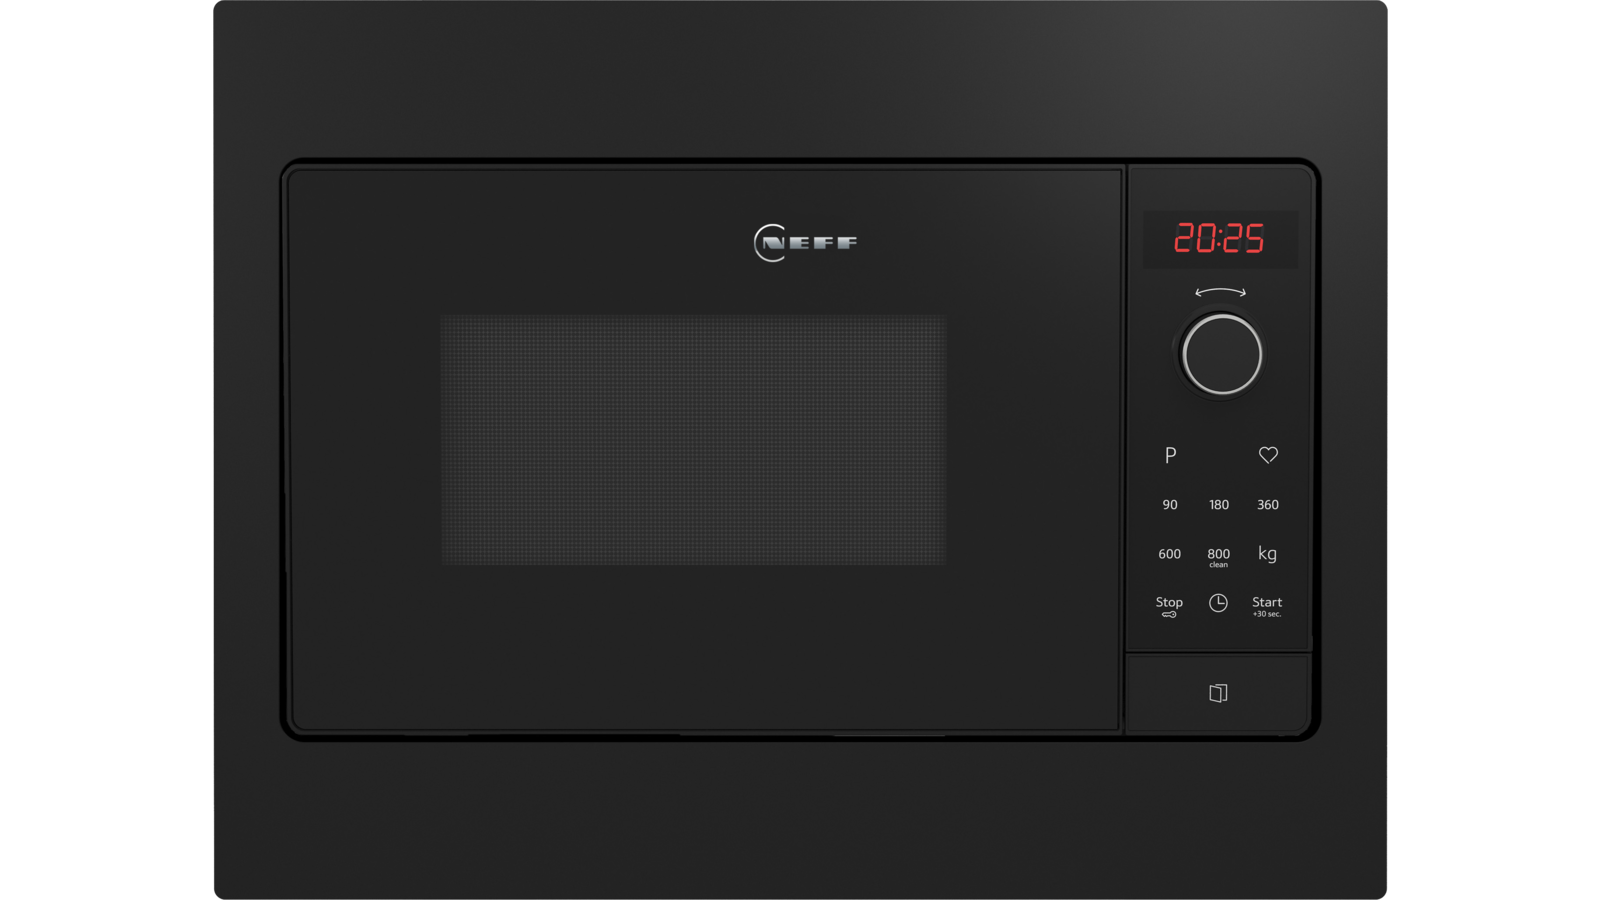 HLAWG25S3B Built-in microwave oven | NEFF GB